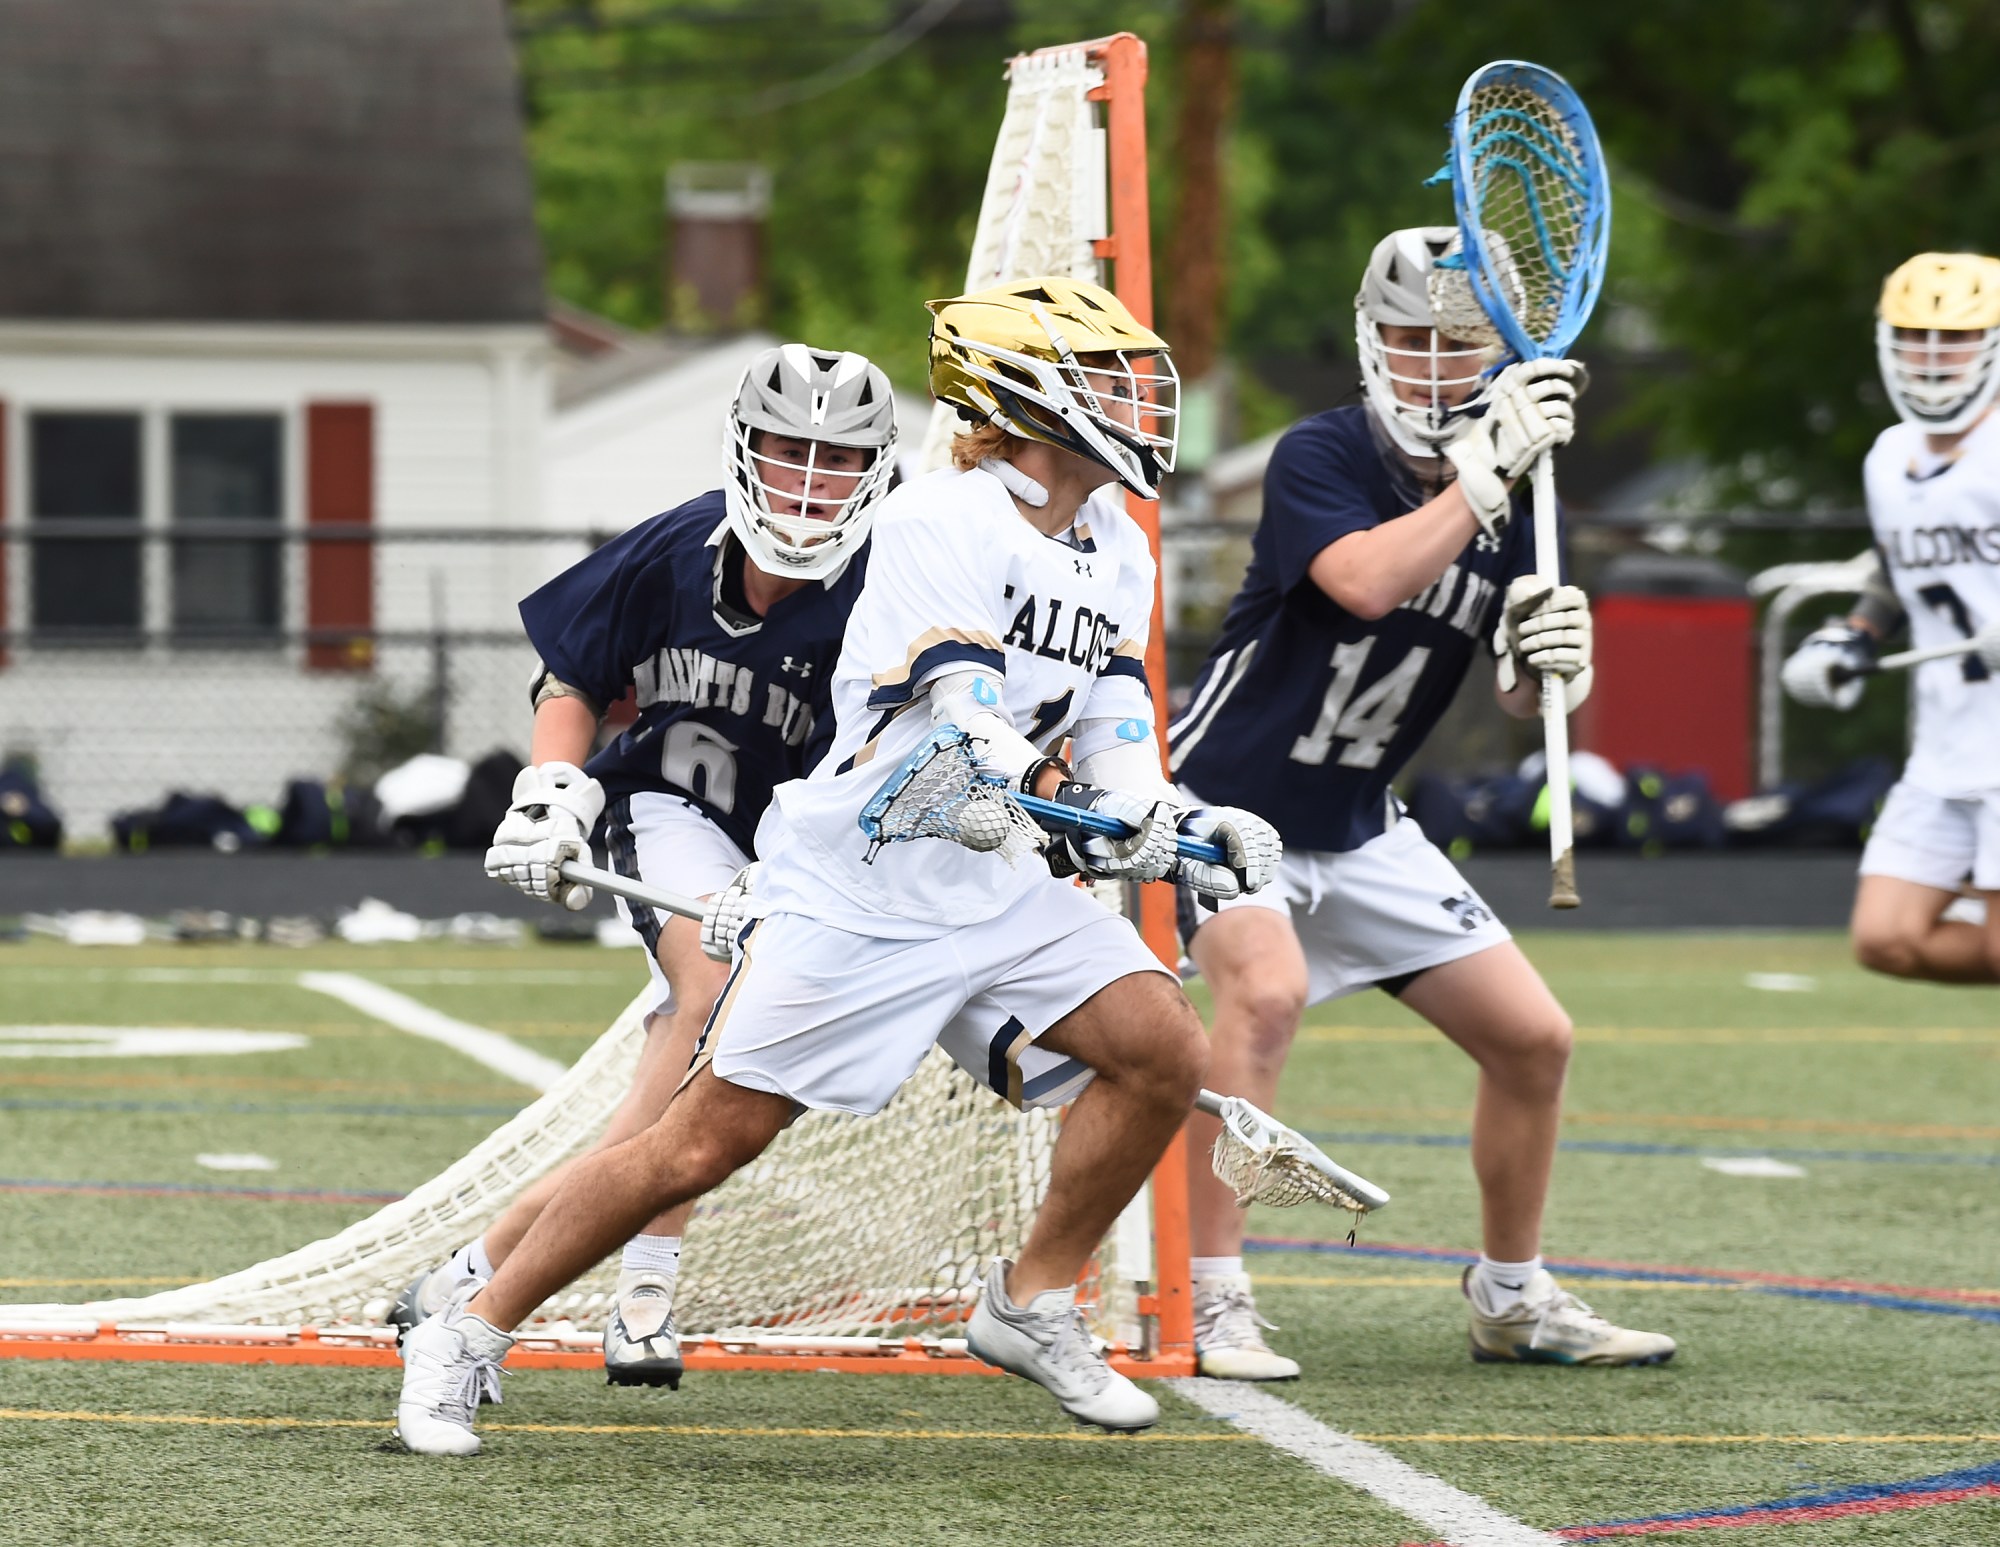 Severna Park's Jack Fish works his way around the net and scores in the first quarter. The Severna Park Falcons defeated the Marriotts Ridge Mustangs, 10-7, in a MPSSAA 3A boys lacrosse semifinal at Glen Burnie High School. (Paul W. Gillespie/Staff photo)